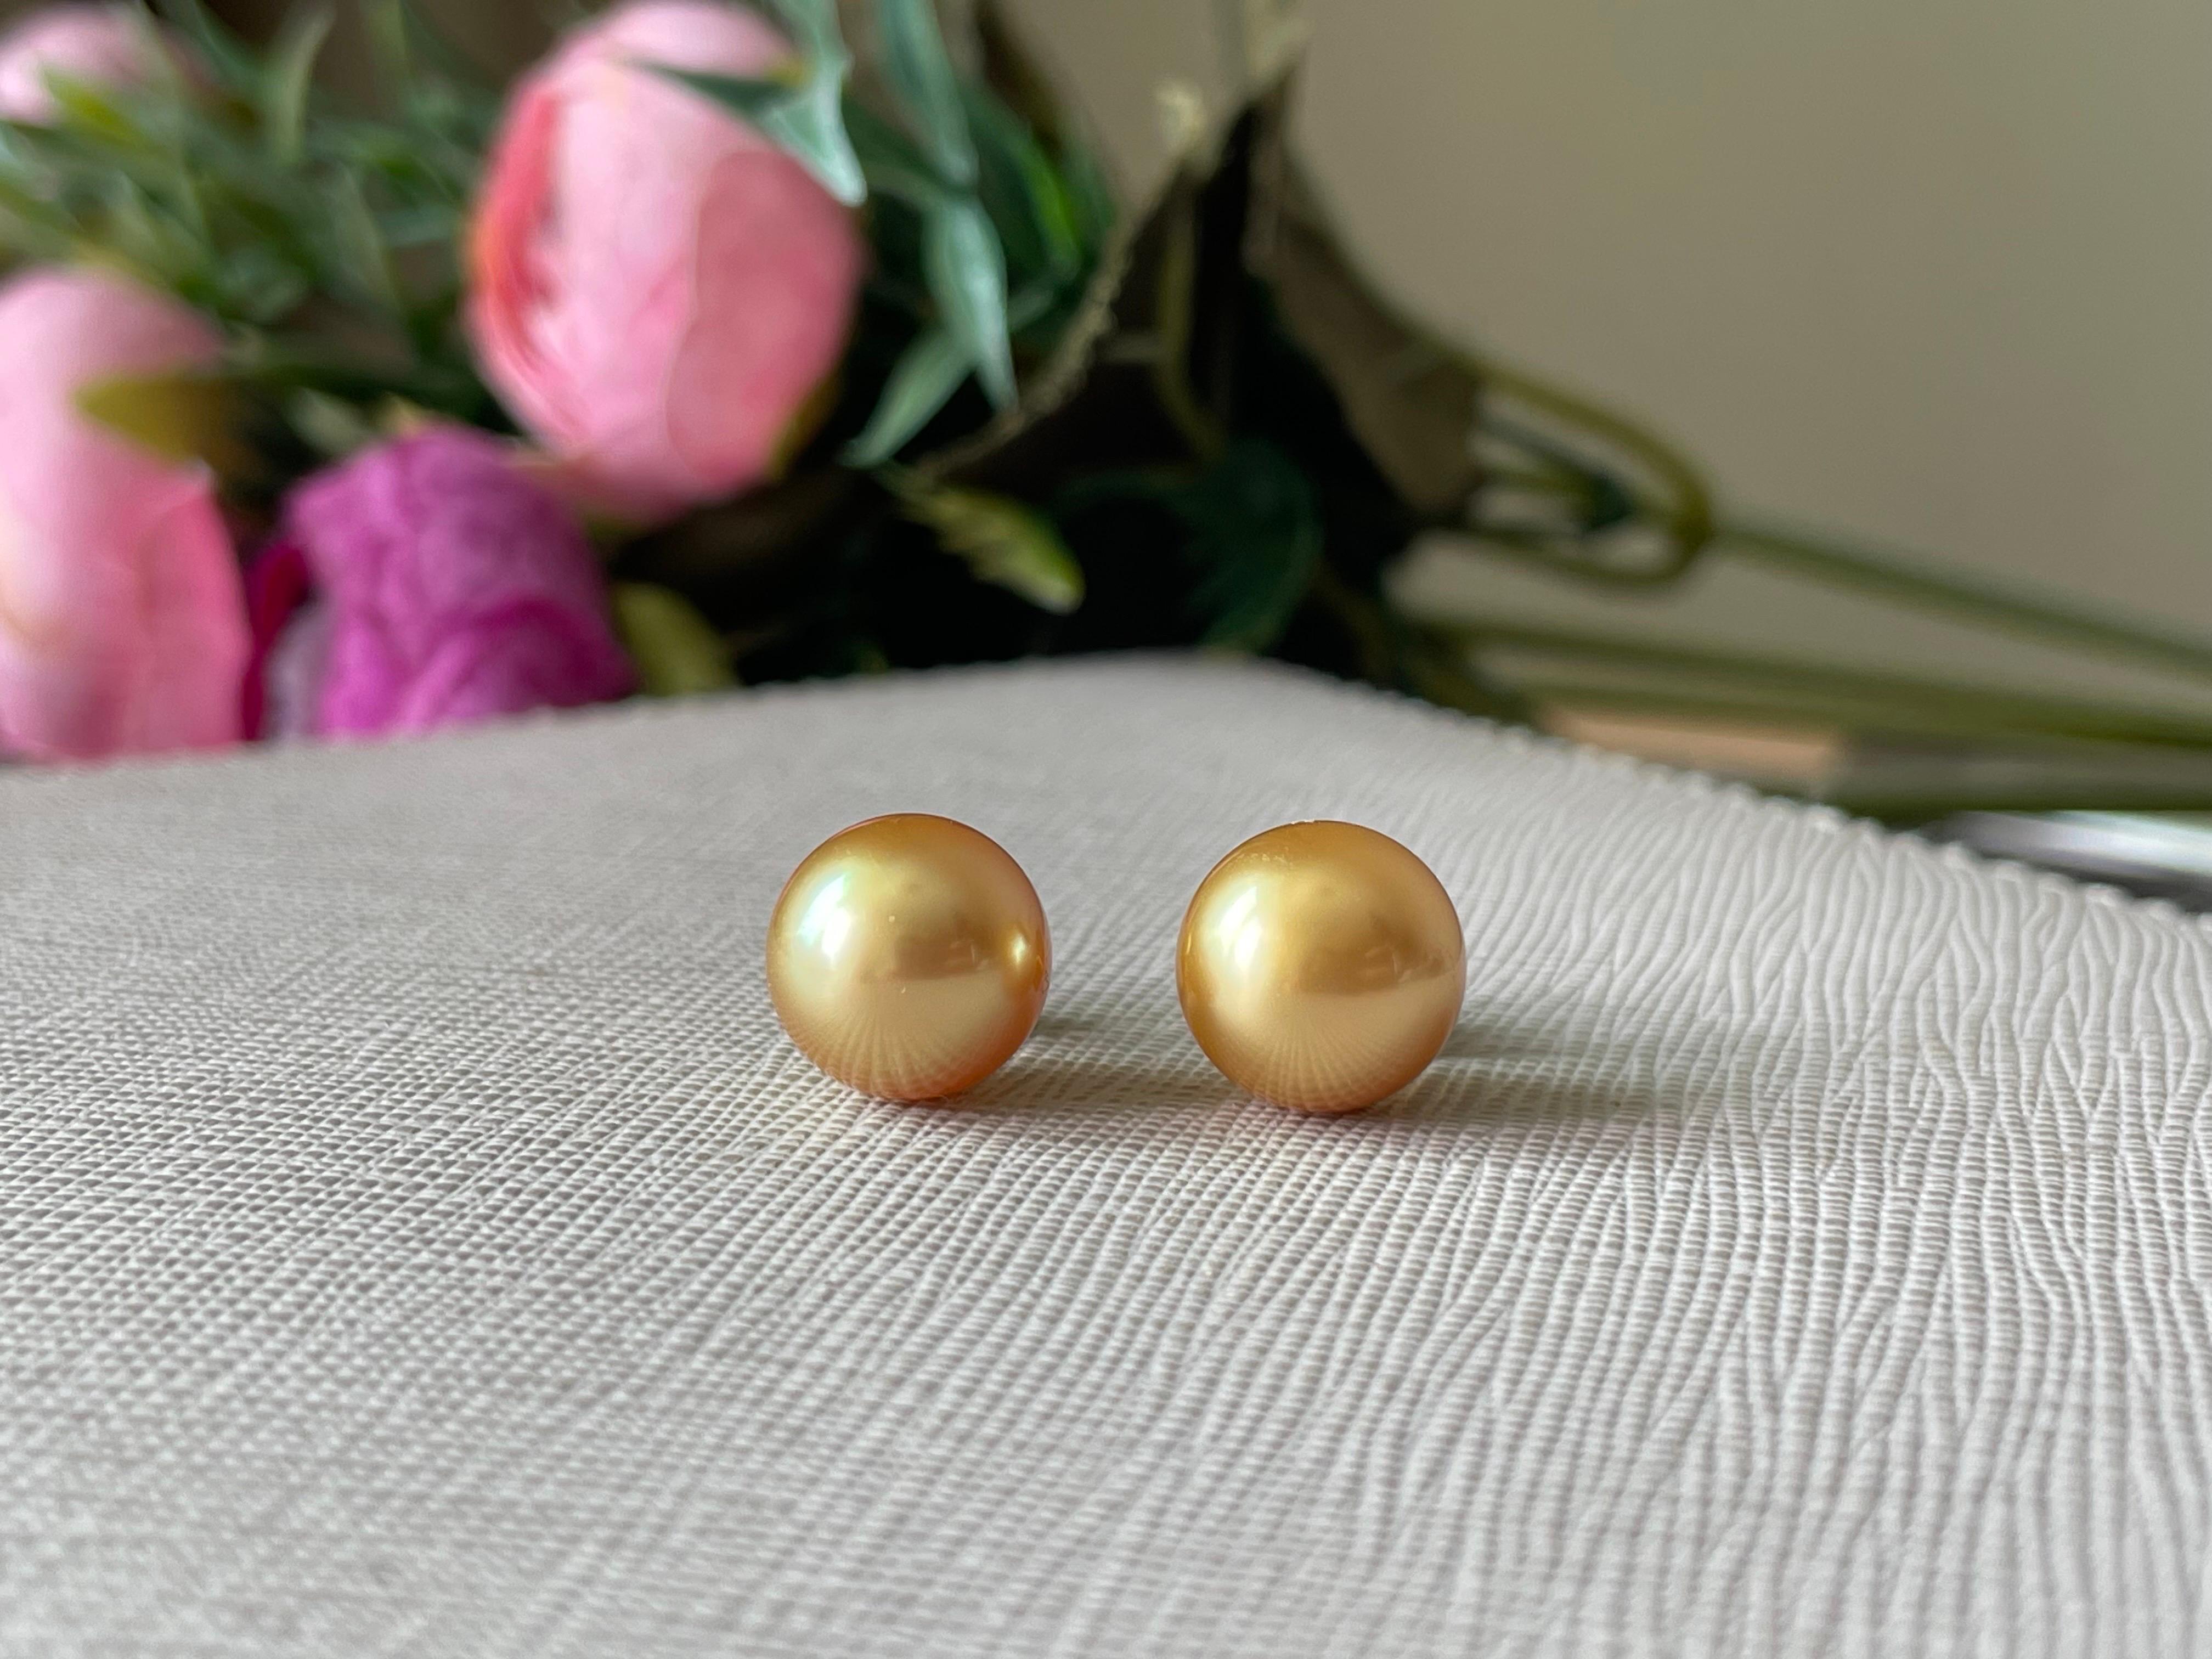 These stunning AAA quality 9.5mm Deep Gold South Sea Pearls boast a brilliant 24 Karat gold shade, an exceptionally rare find. They are fully round with a high luster, making them even more desirable. Securely mounted on solid 18-karat gold